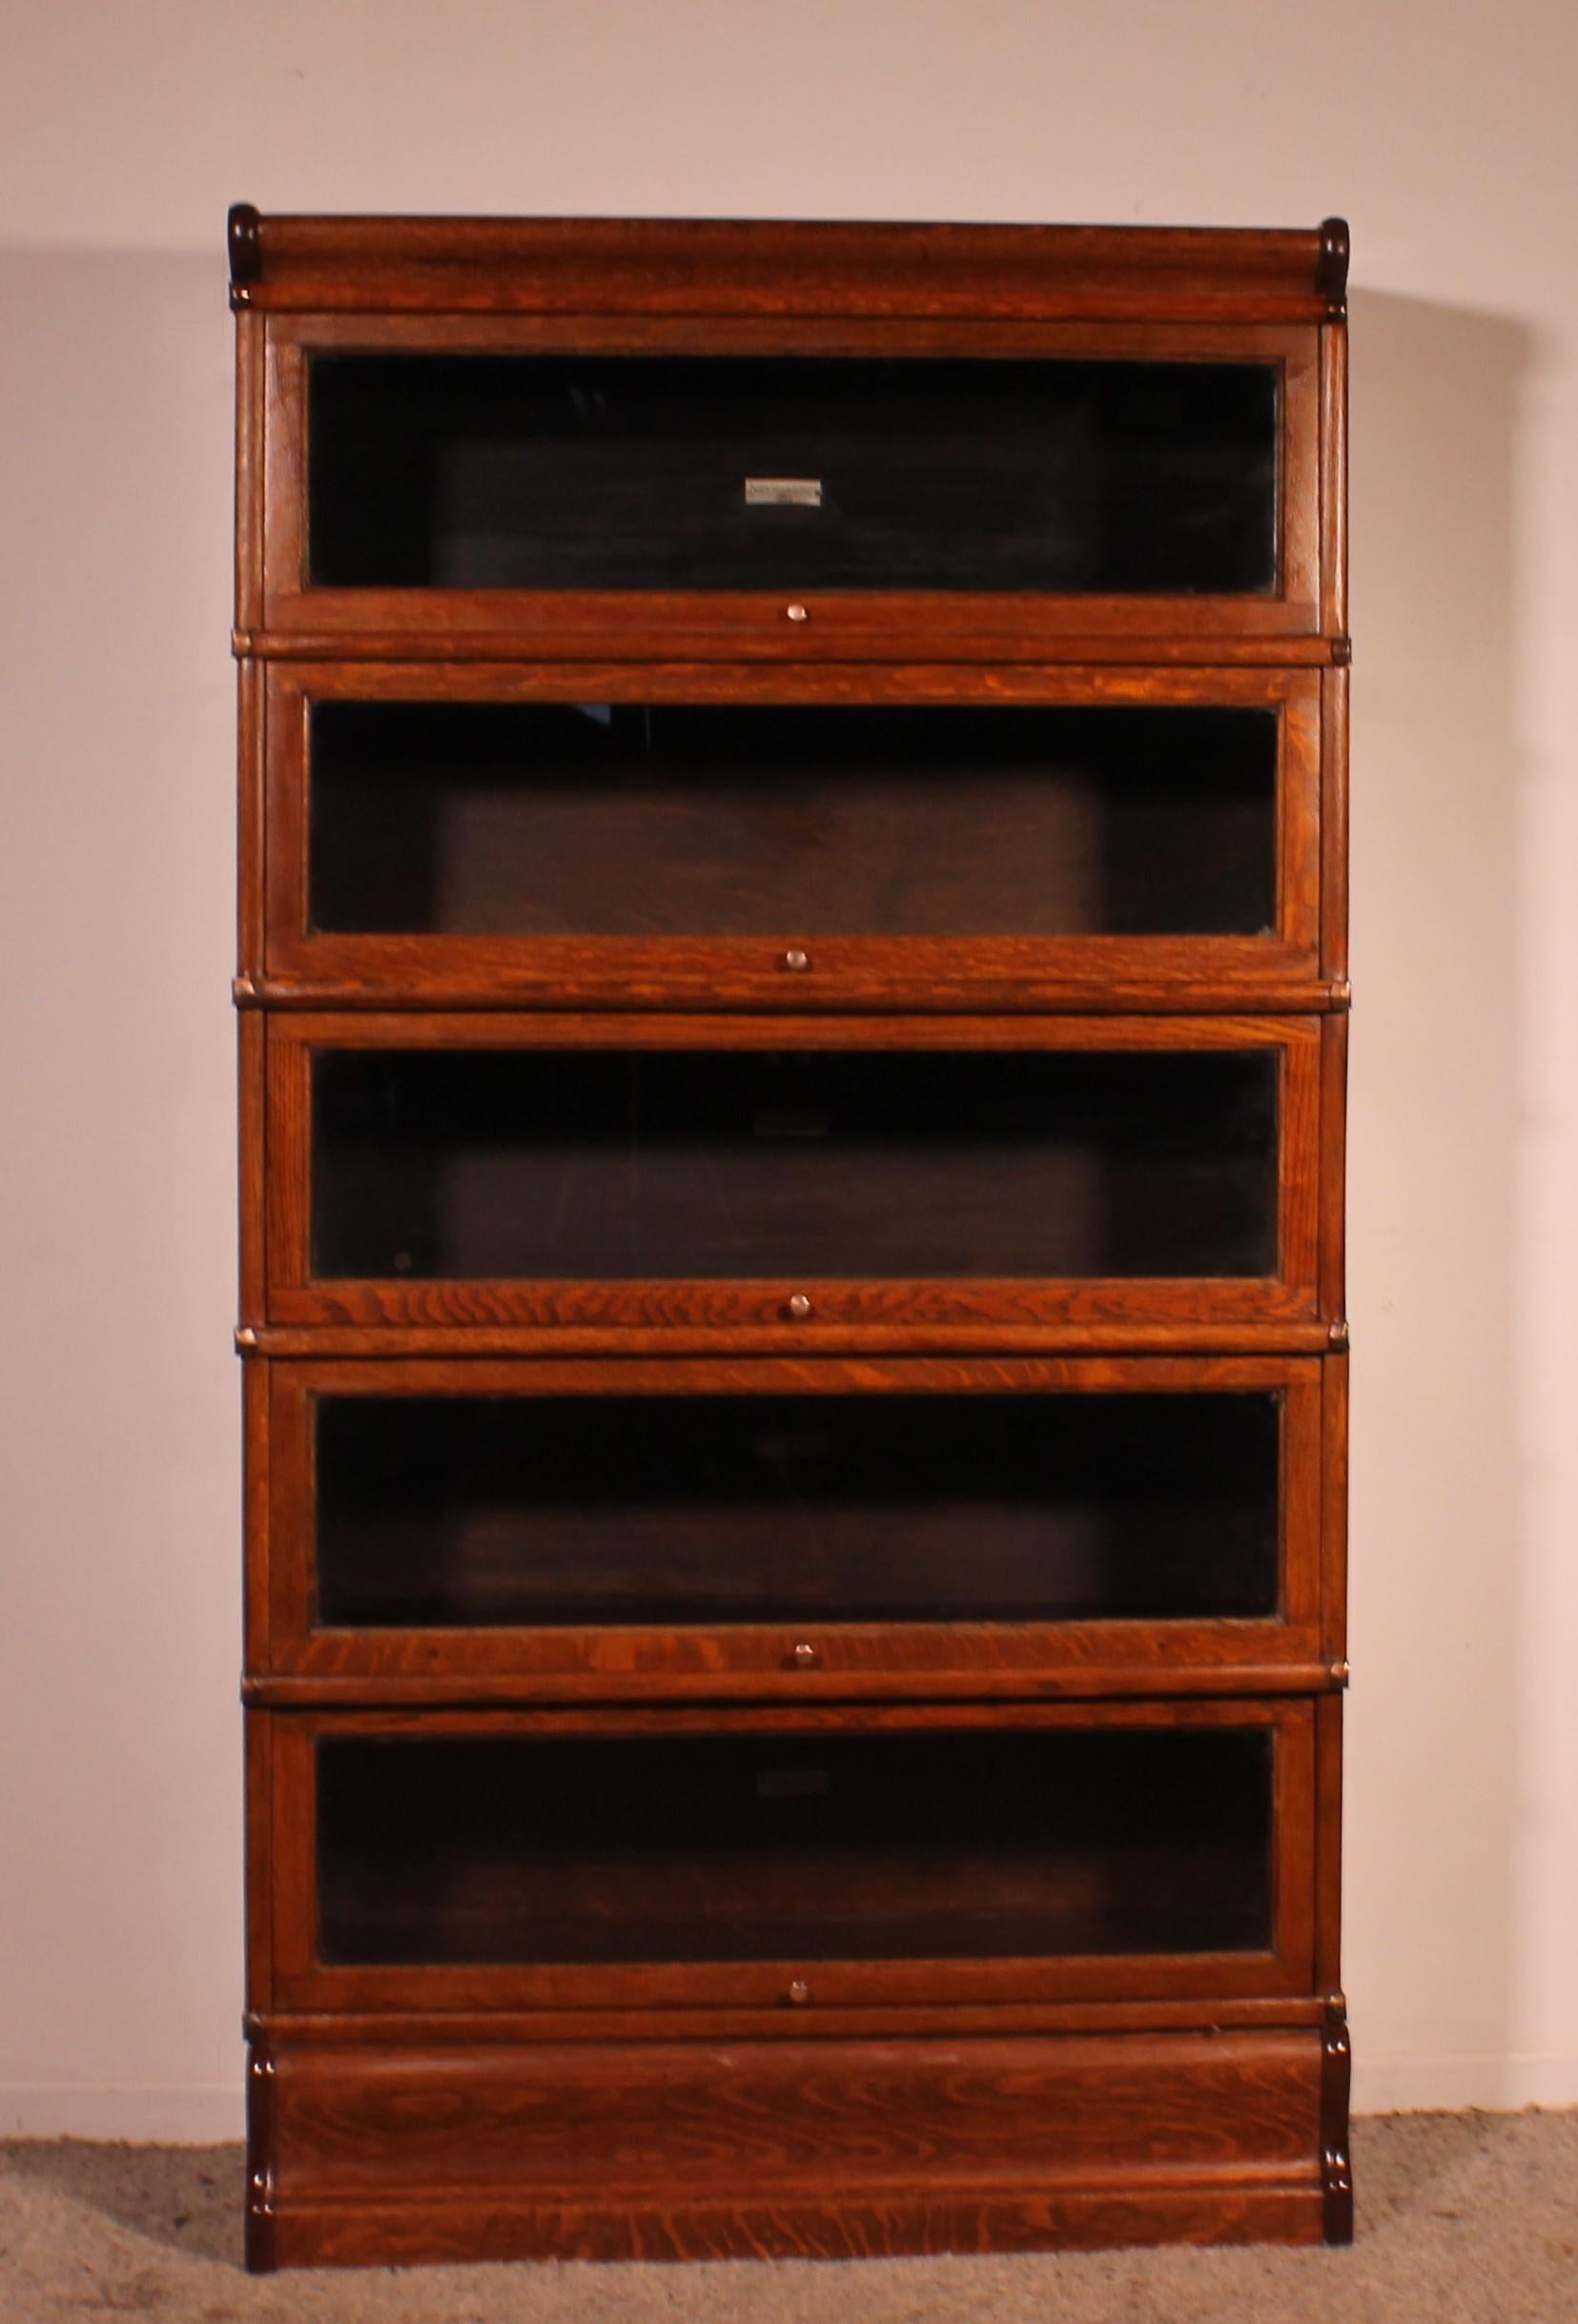 Elegant Globe Wernicke London oak bookcase from the end of the 19th century - Early 20th century from  England which has 5 elements

Beautiful oak bookcase which is composed of a molded base and cornice and 5 glazed elements

Bookcase with lots of